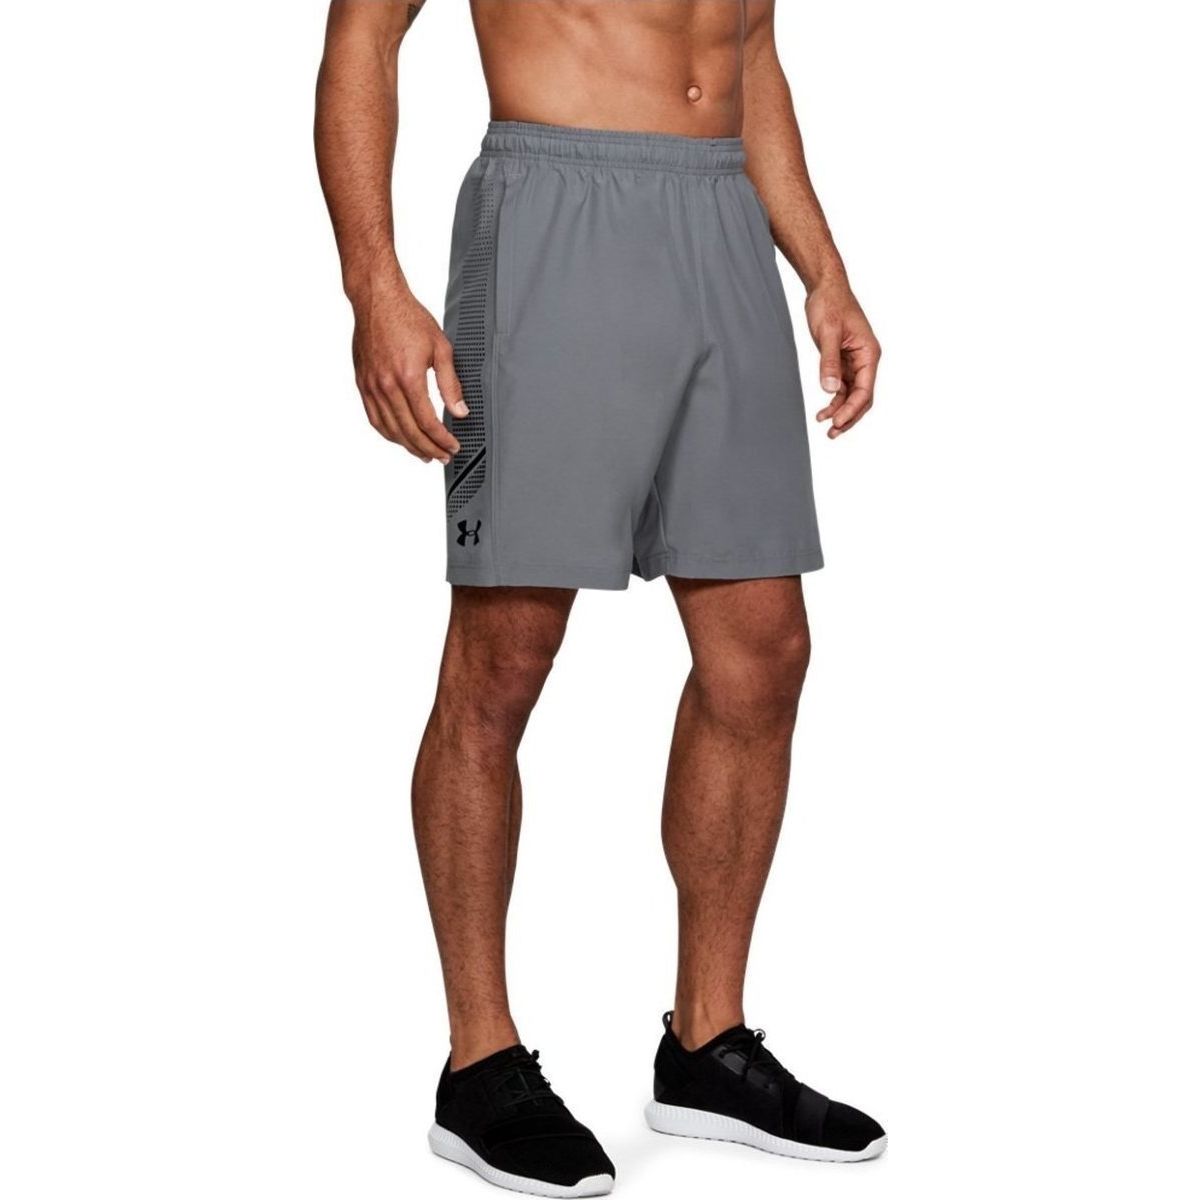 Under Armour Woven Graphic Men's Shorts 1309651-513